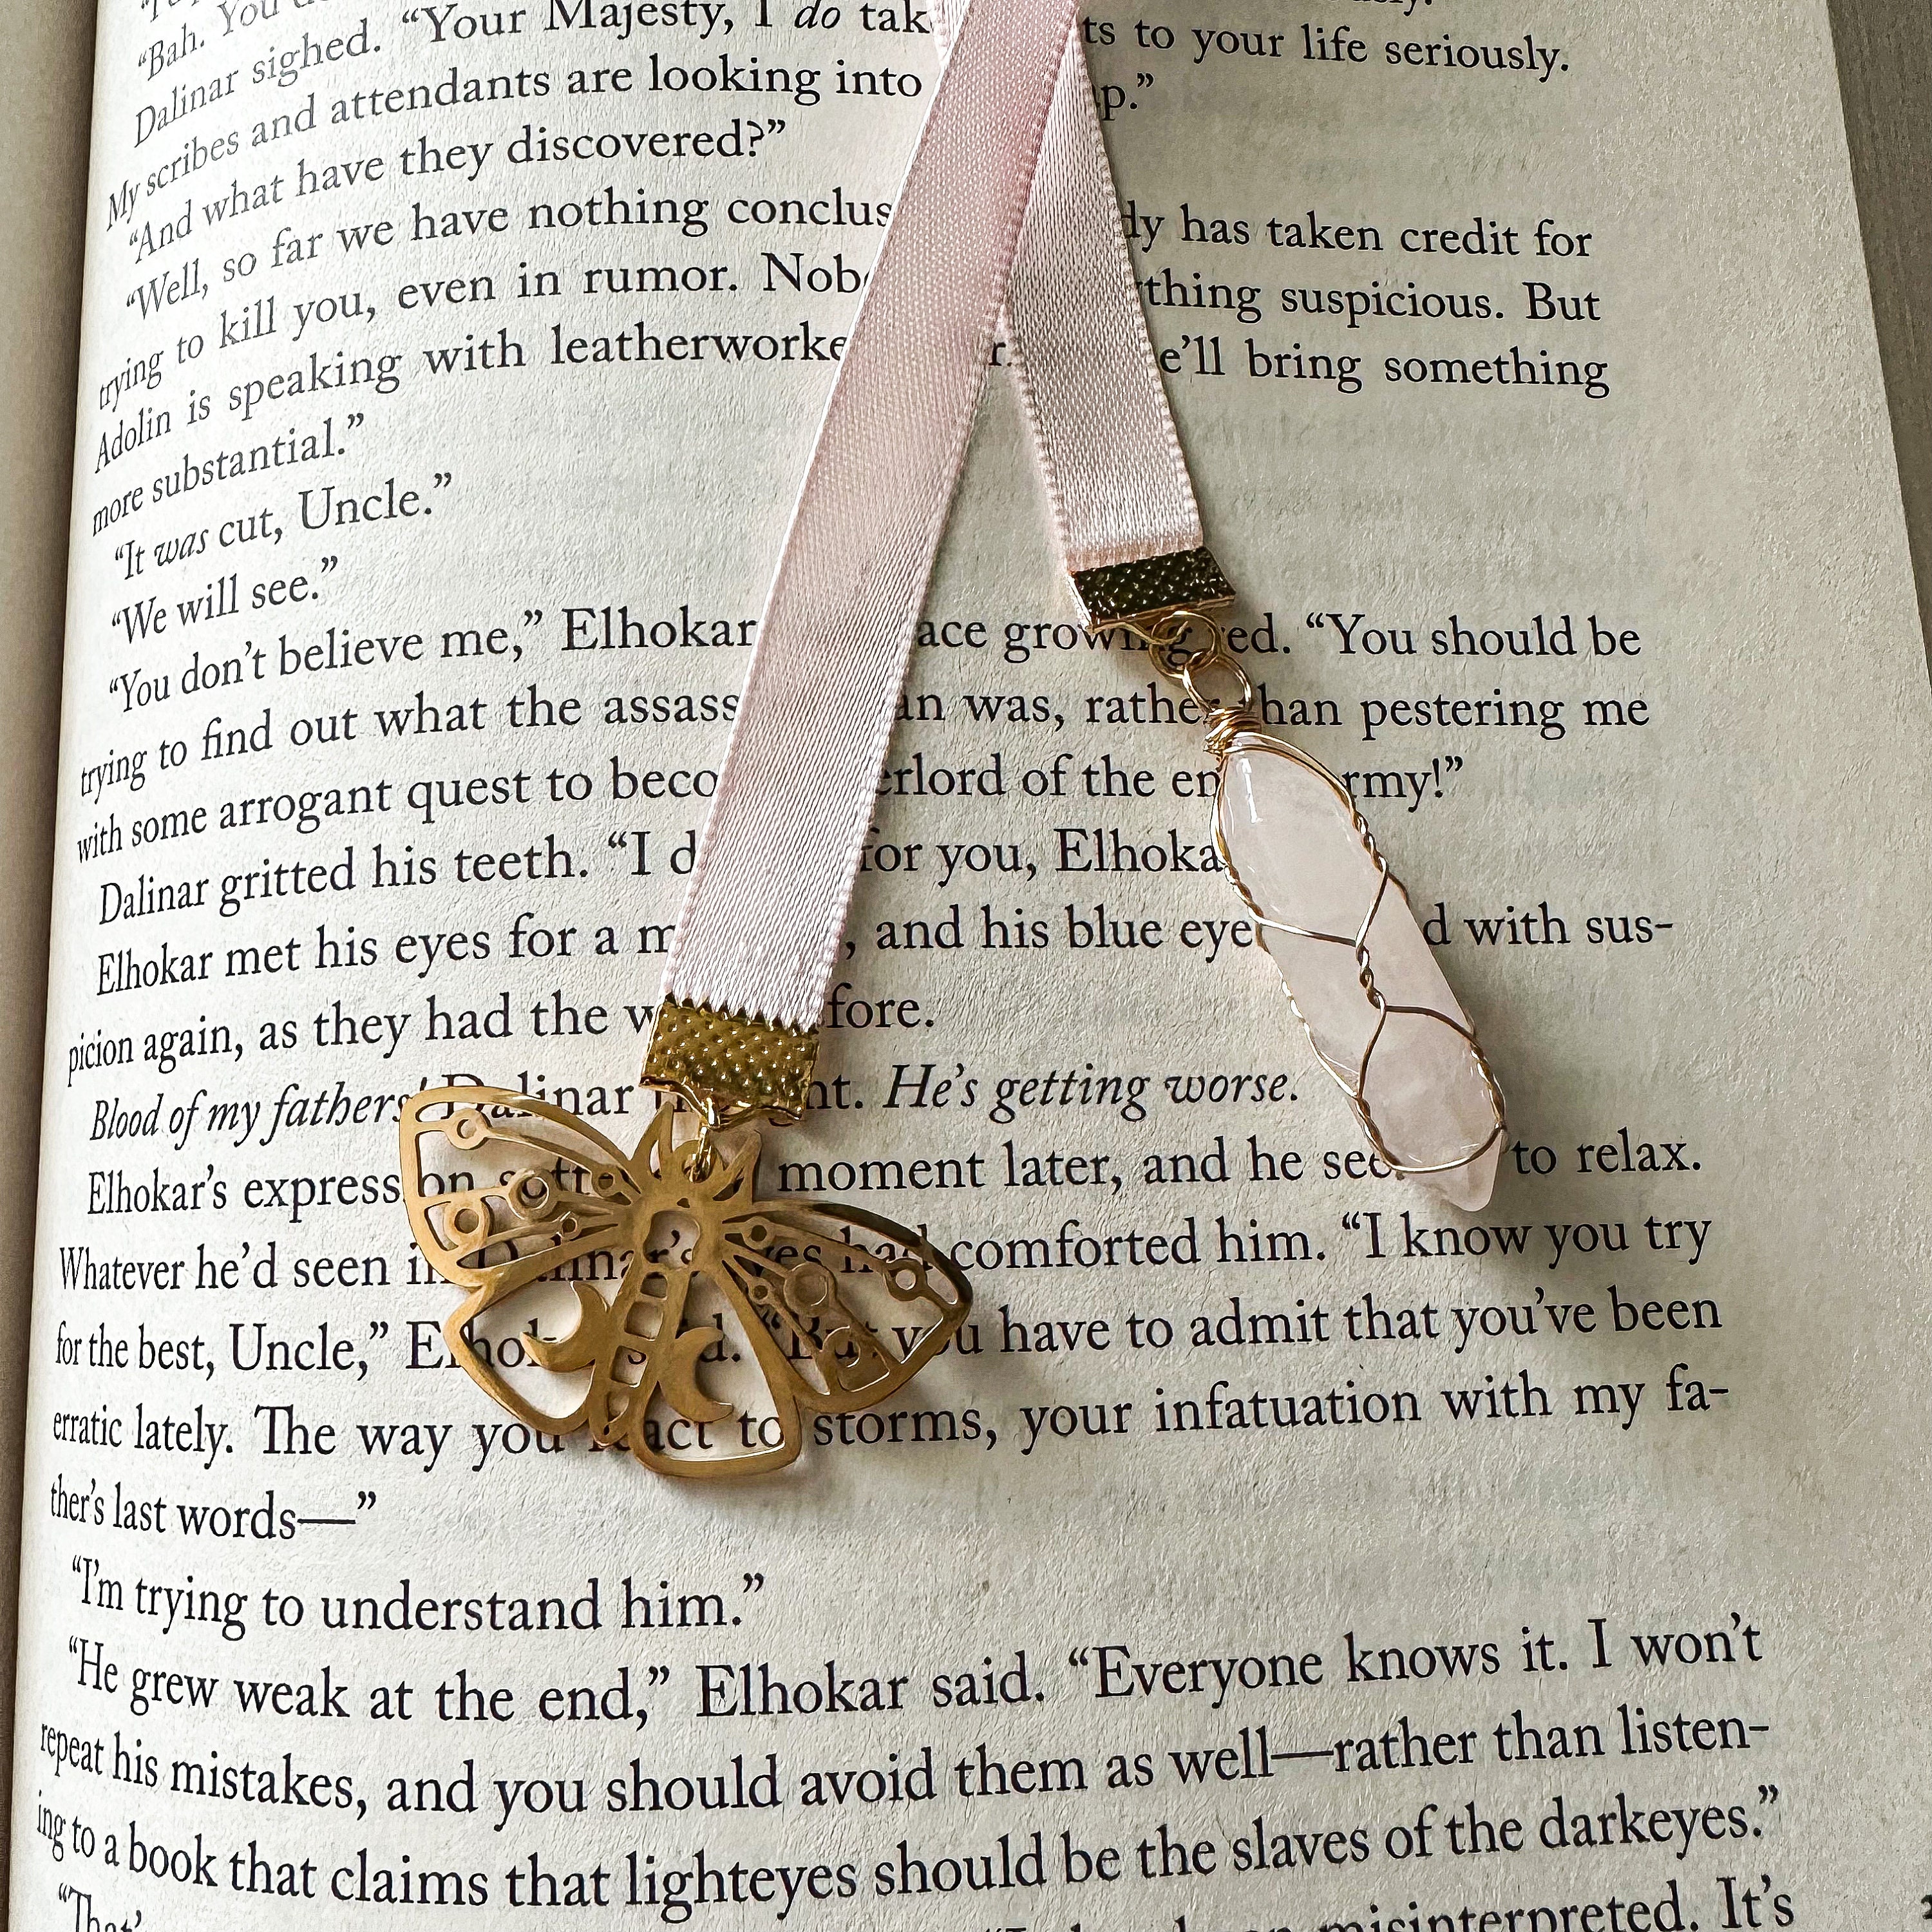 Bookmark, Hamsa Bookmark, Ribbon Bookmark, Maroon Ribbon, Gift for Book  lover, Bookworm, Planner, Gift for Mom, Thank you gift, Accessory